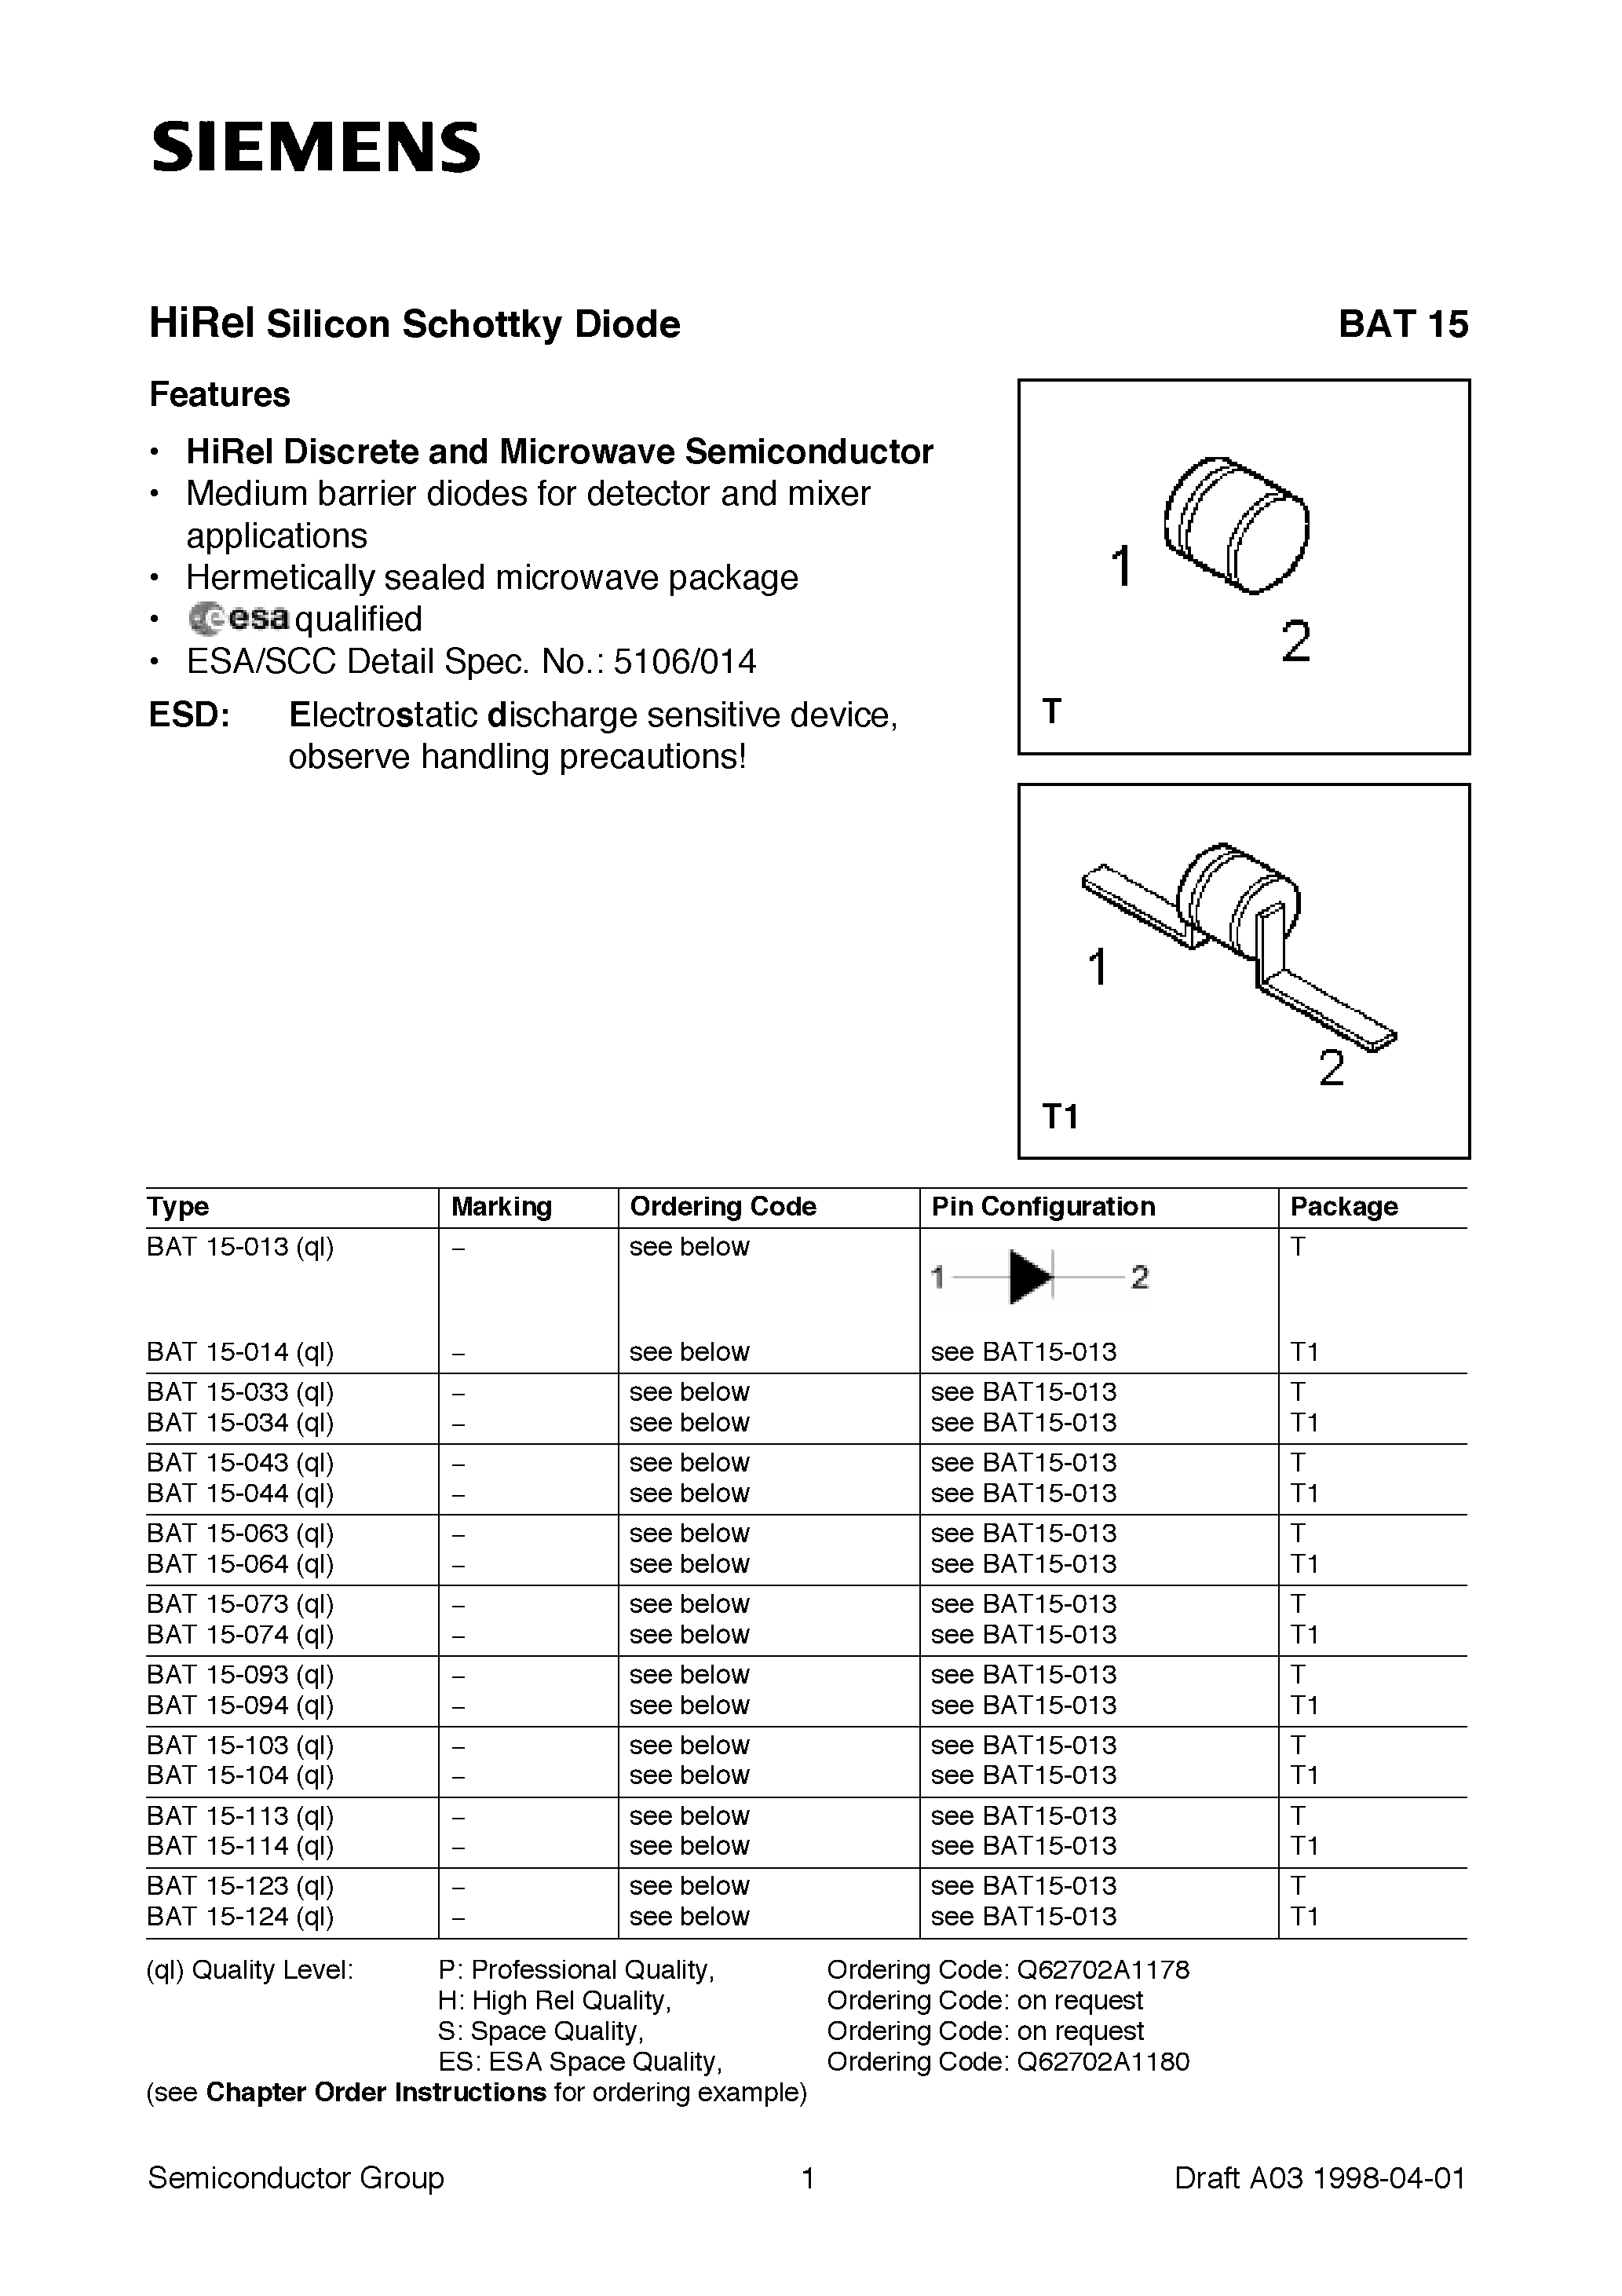 Datasheet BAT15-103 - HiRel Silicon Schottky Diode (HiRel Discrete and Microwave Semiconductor Medium barrier diodes for detector and mixer applications) page 1